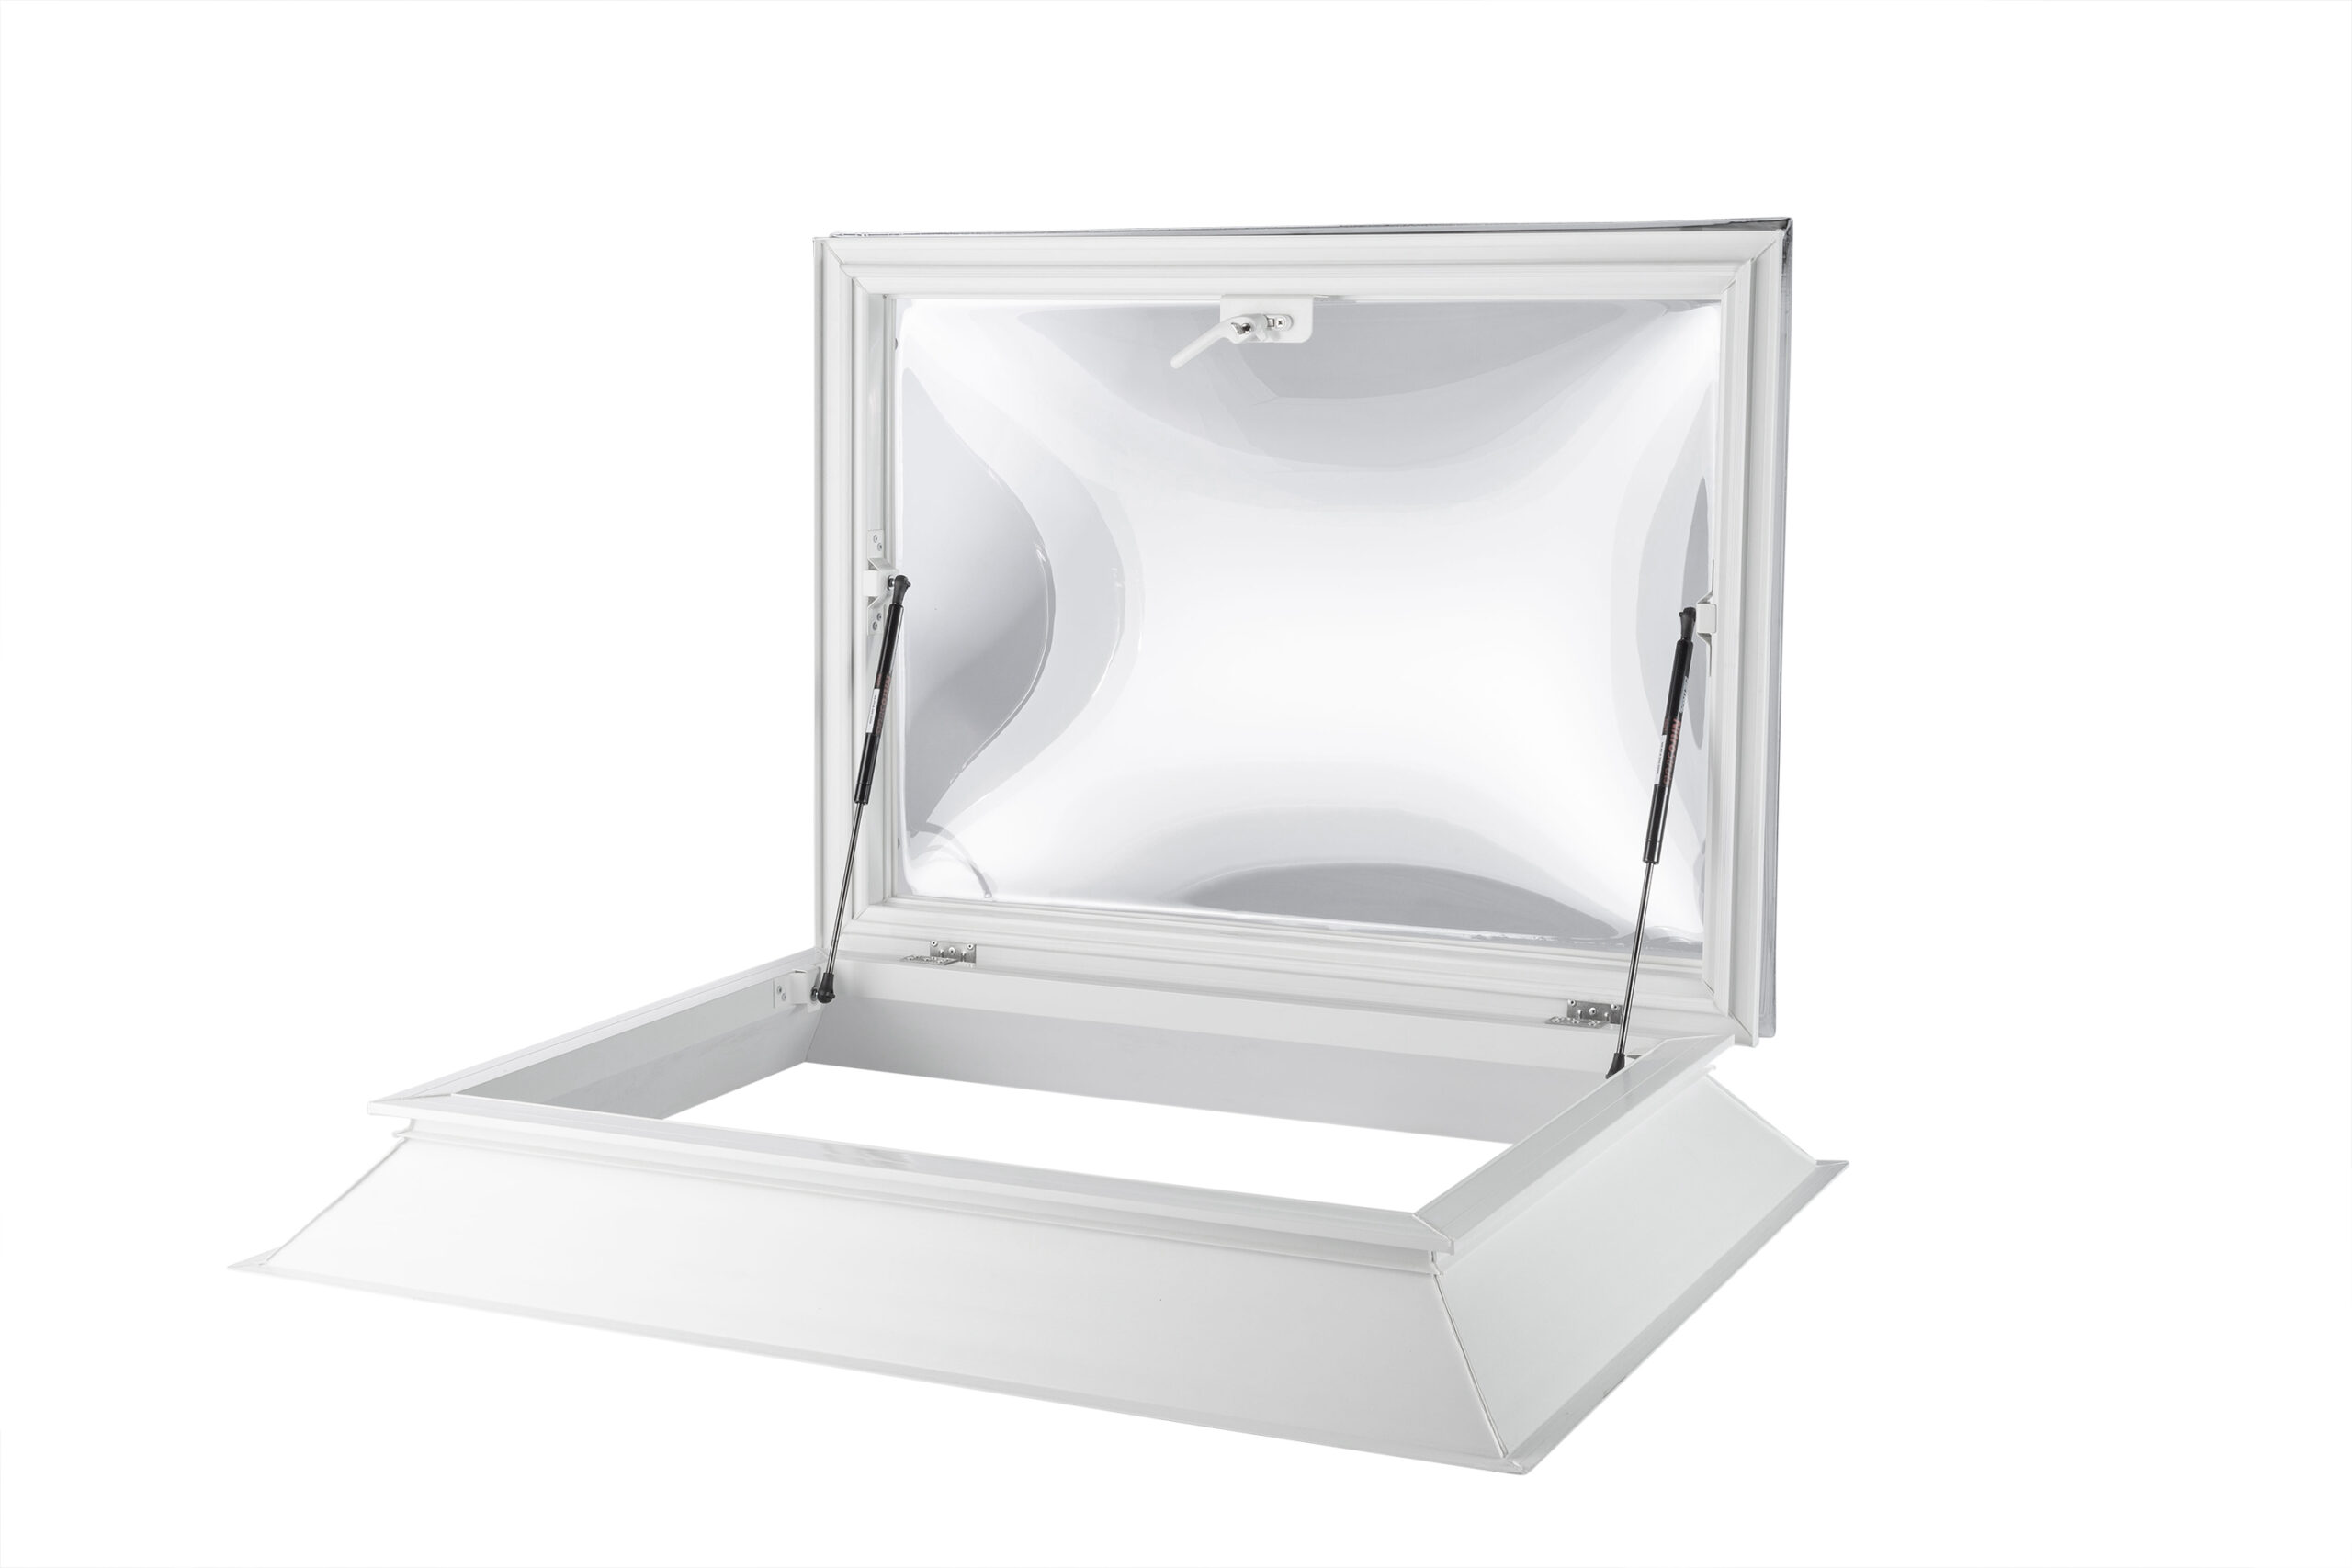 COXDOME ACCESS Hatch Roof Domes + 150mm Upstand